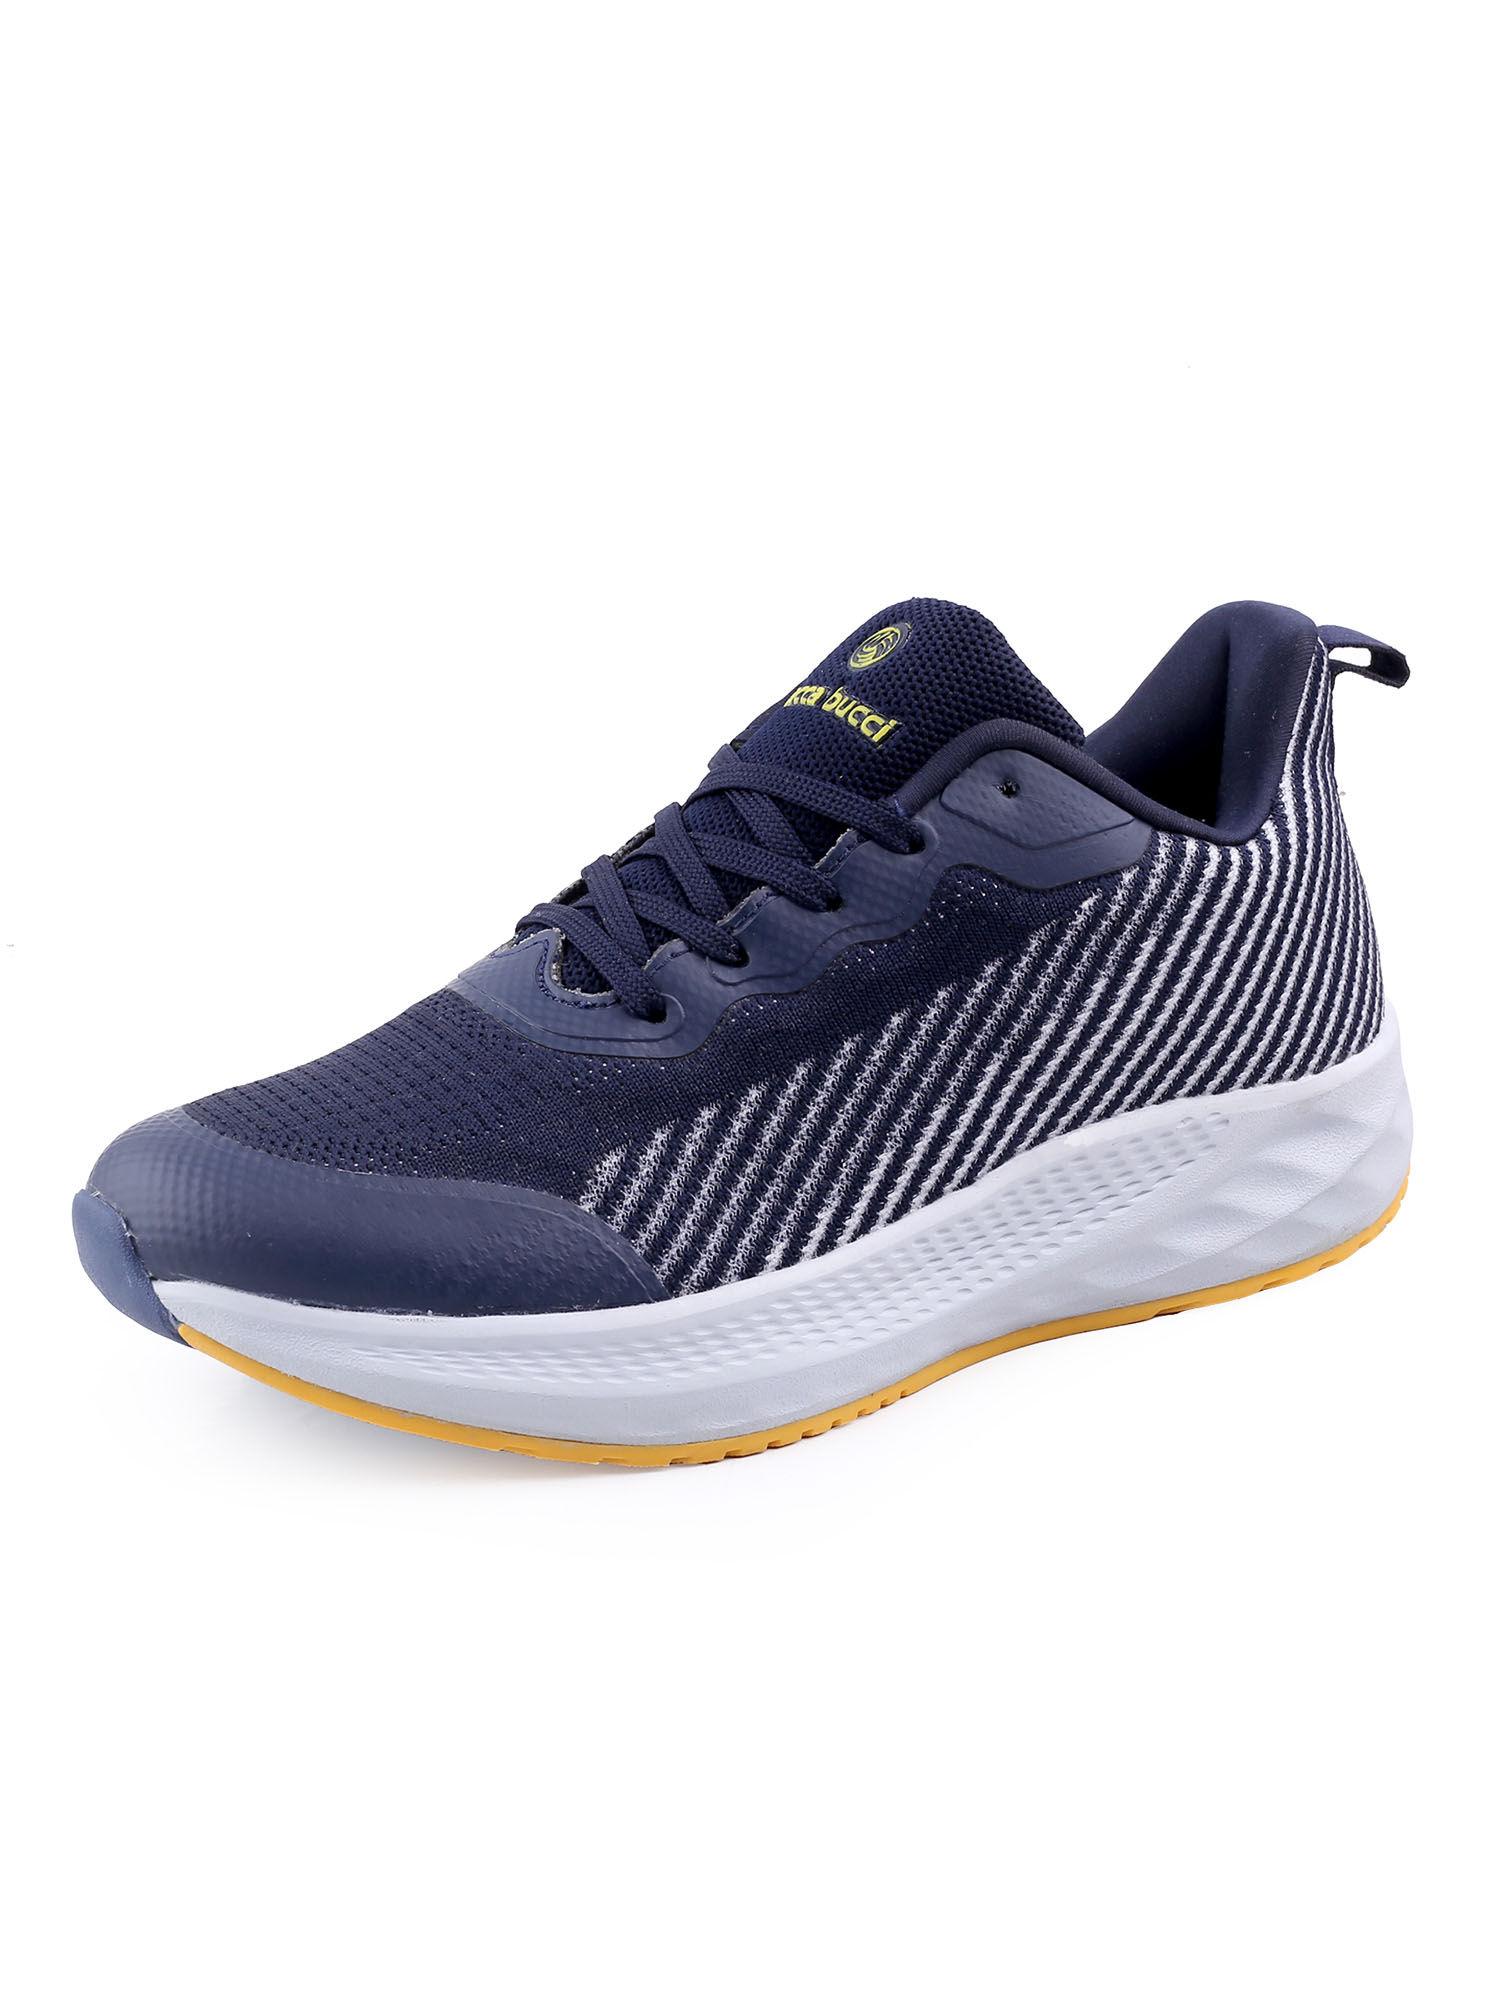 essential your everyday all purpose walking running sports shoes